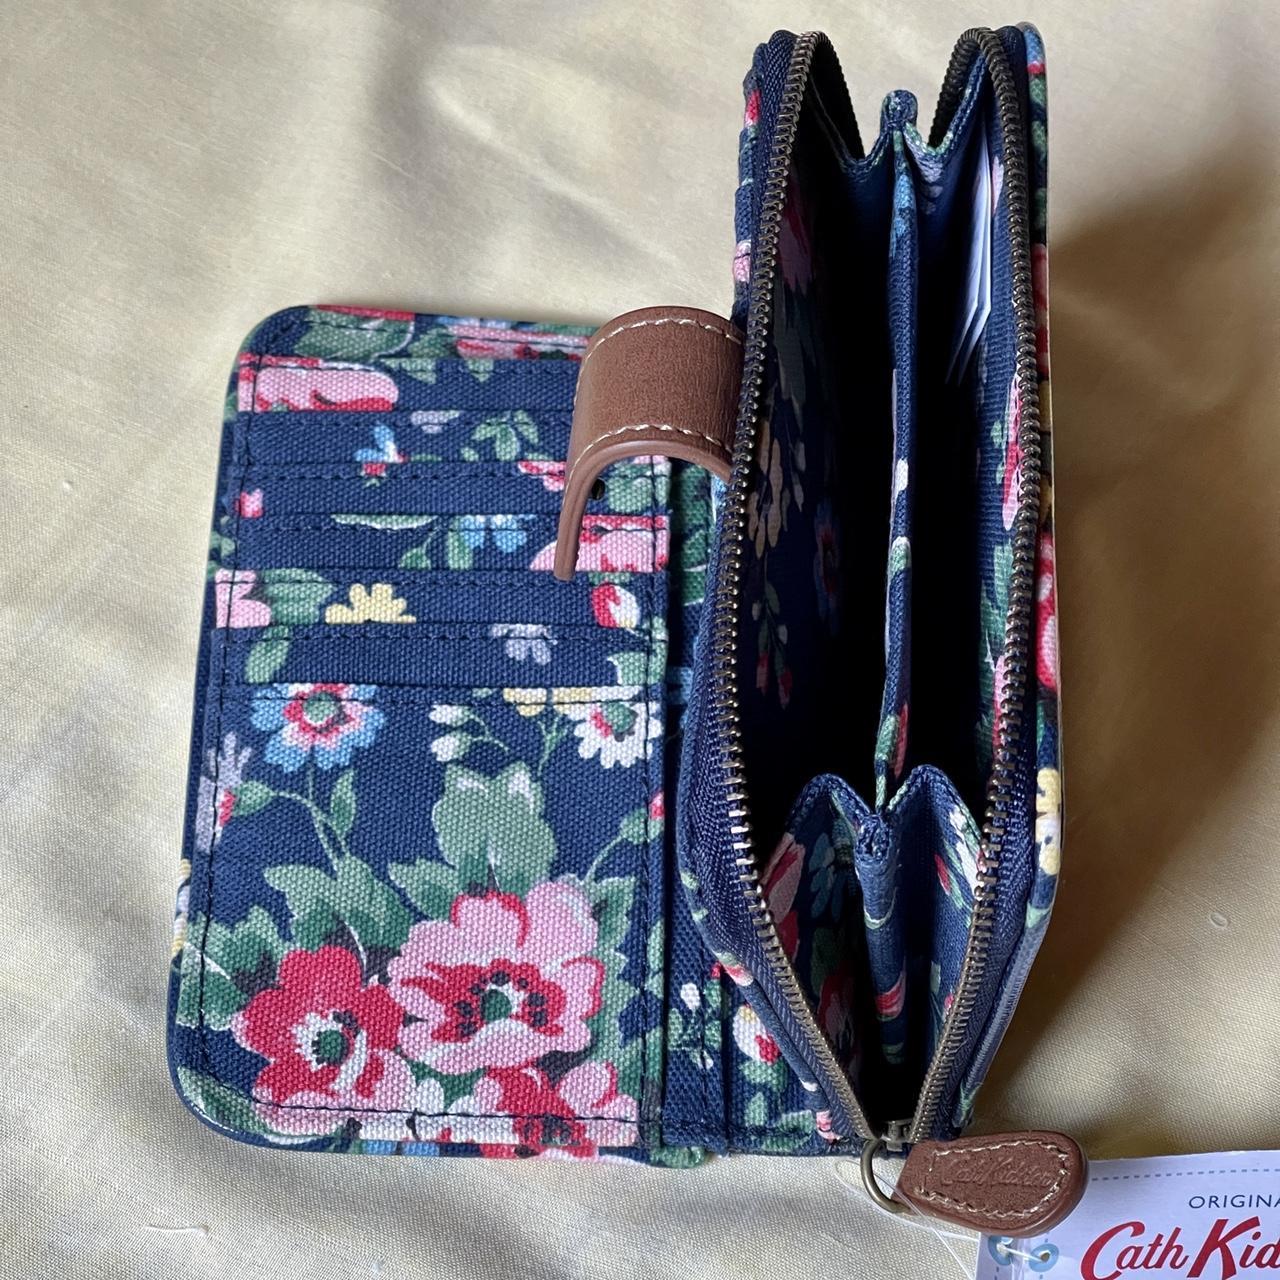 Cath Kidston Women's Navy and Pink Wallet-purses (4)